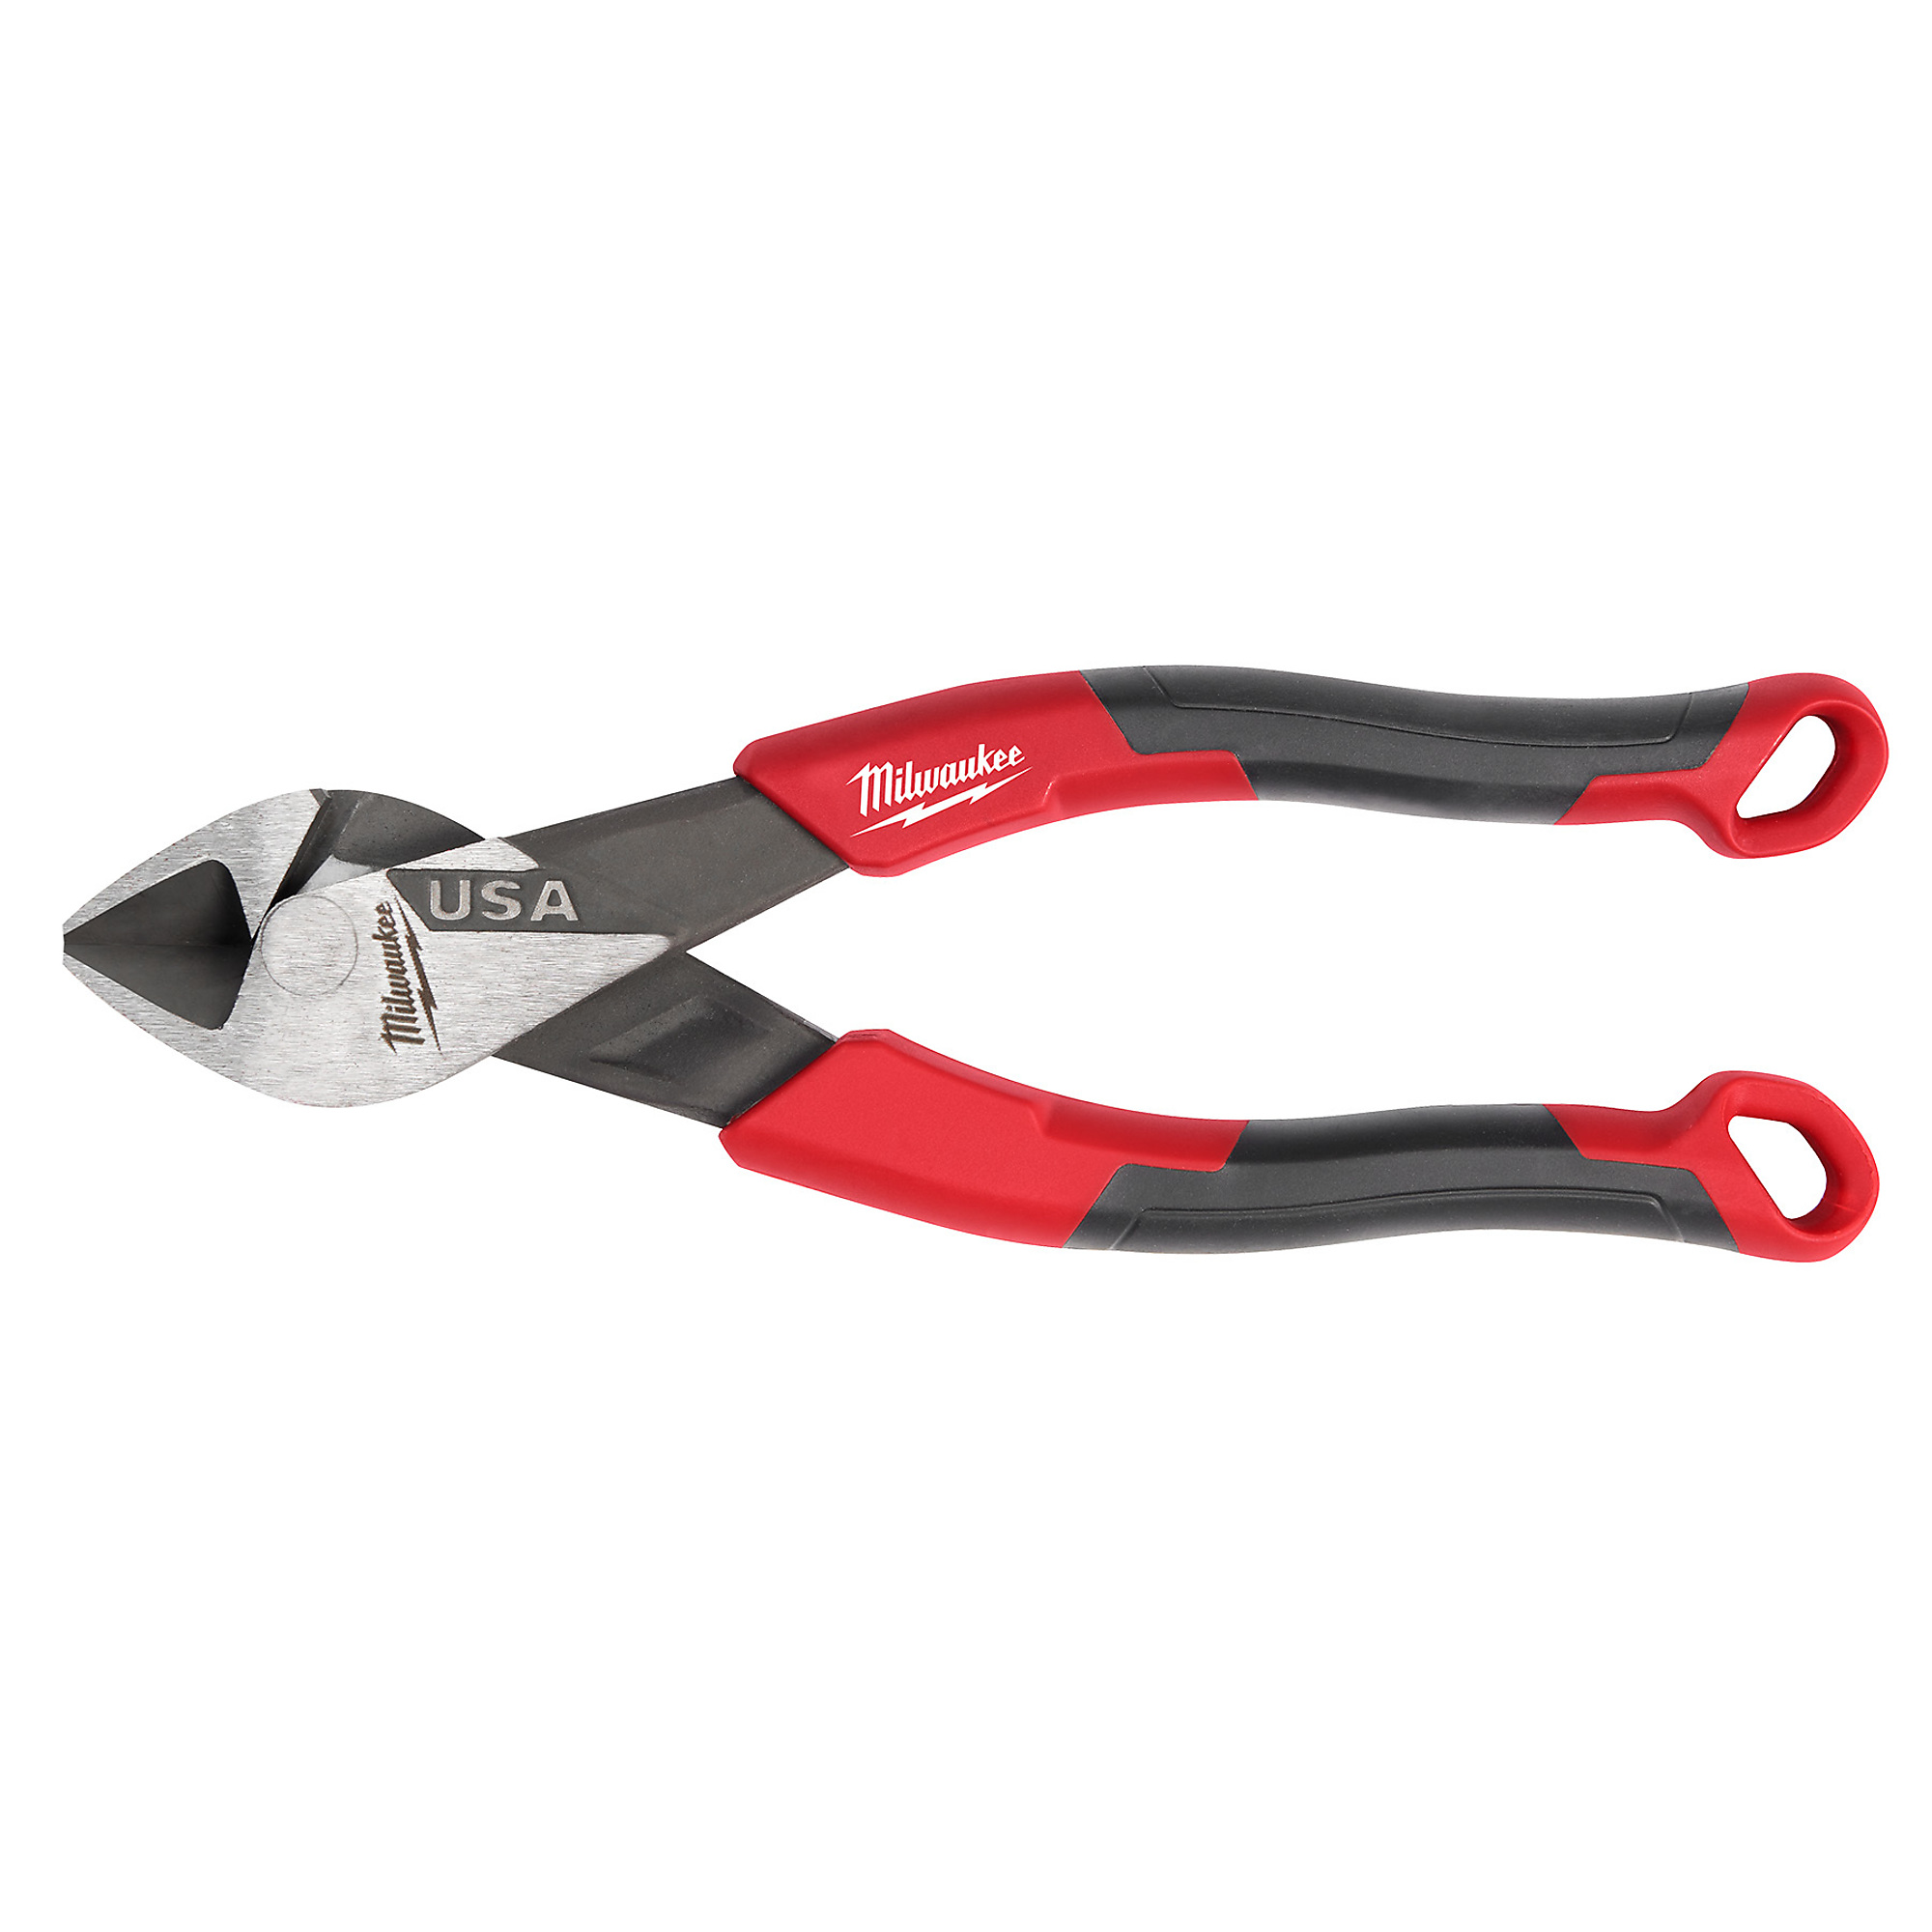 Milwaukee, 6Inch Diagonal Comfort Grip Pliers USA, Pieces (qty.) 1, Material Steel, Model MT556